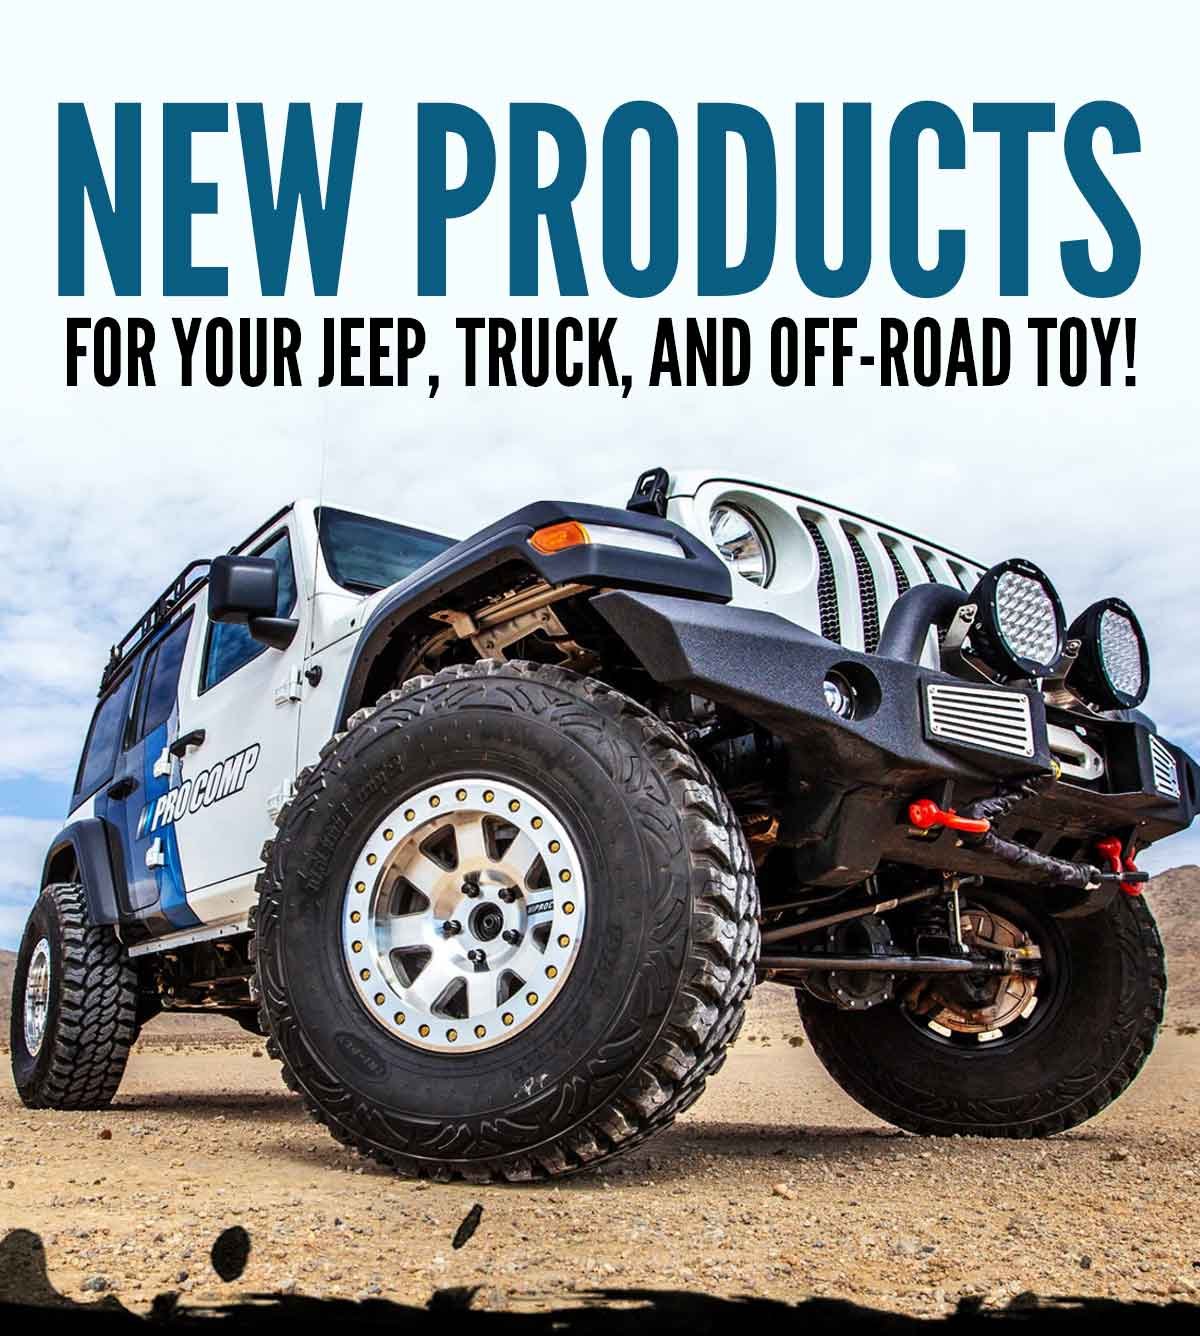 New Products For Your Jeep, Truck, and Off-Road Toy!